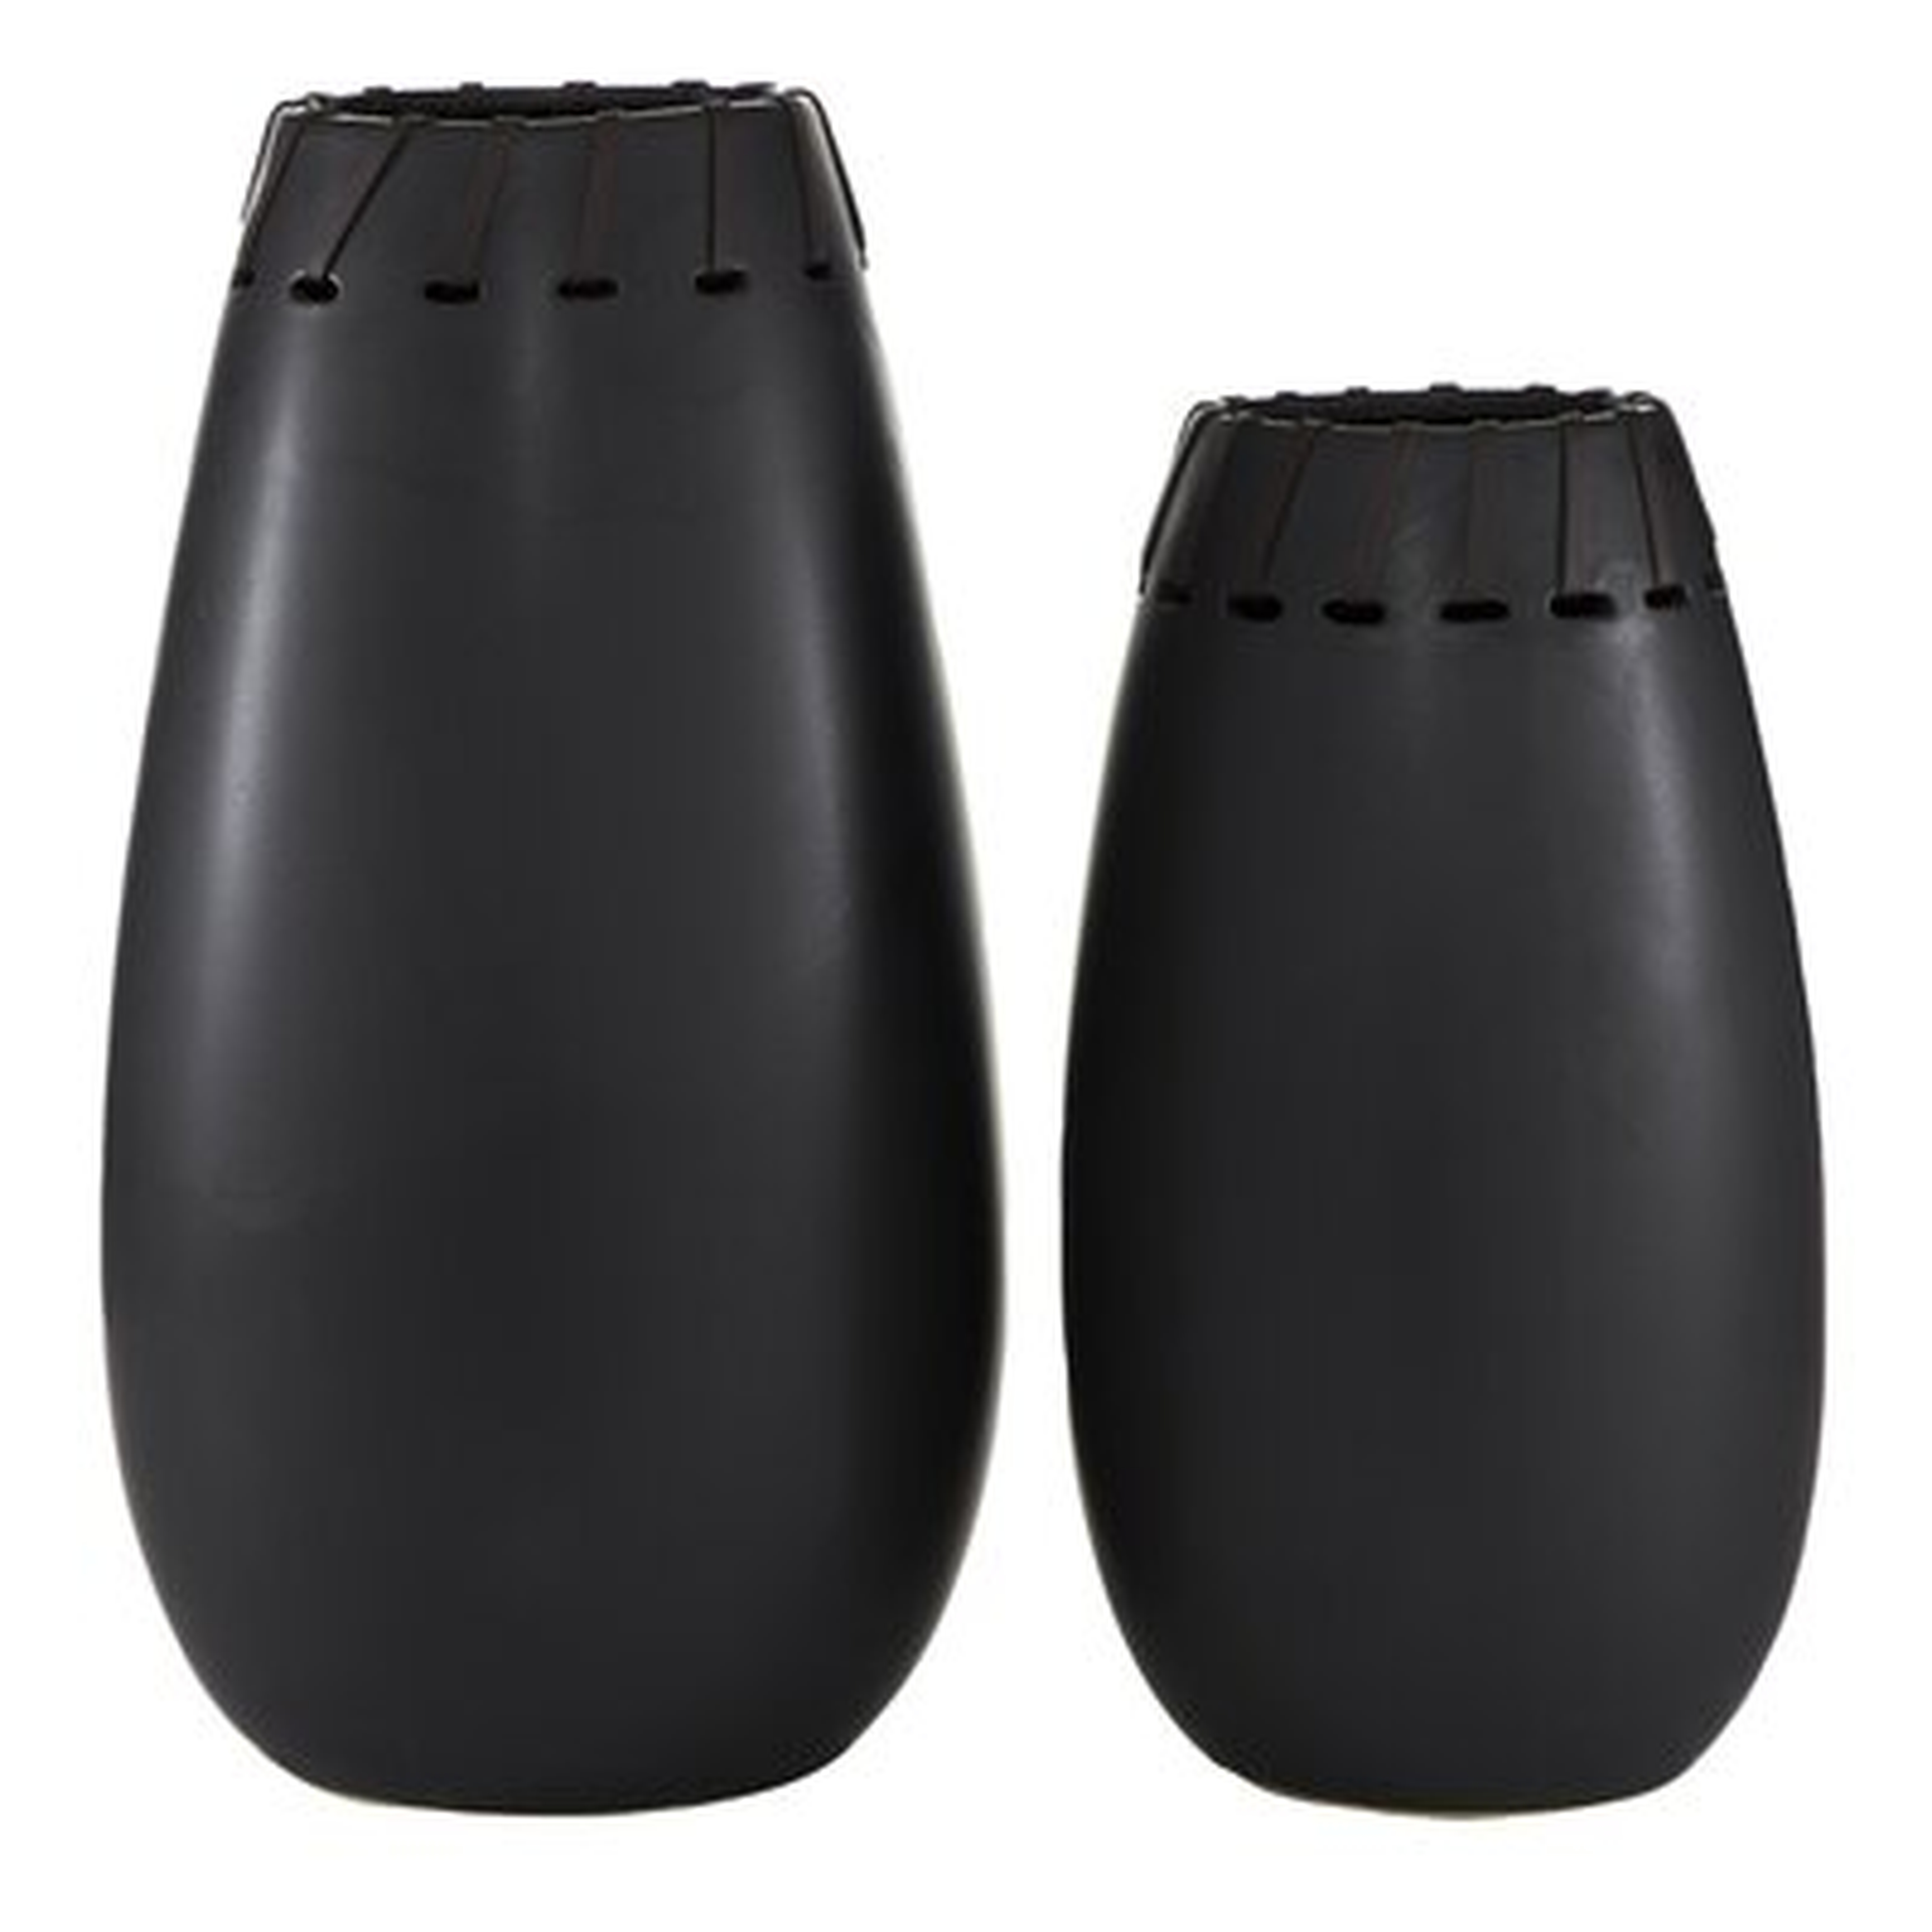 Round Ceramic Black Vases With Leather Accents, Set Of 2: 16" X 13" - Wayfair